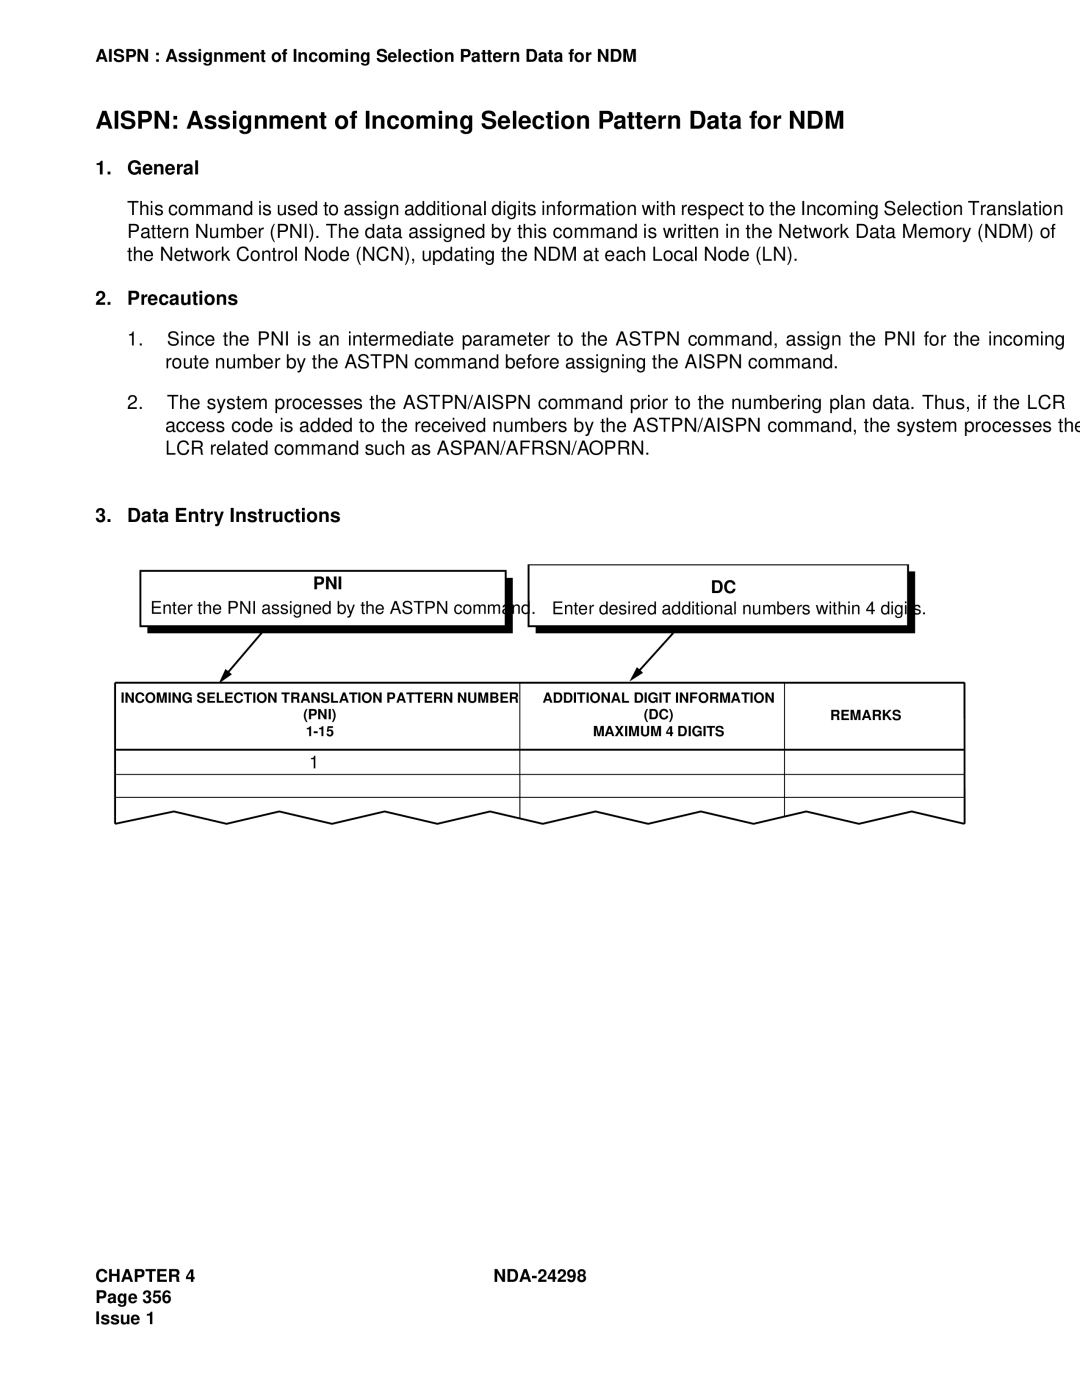 NEC NDA-24298 manual Aispn Assignment of Incoming Selection Pattern Data for NDM 